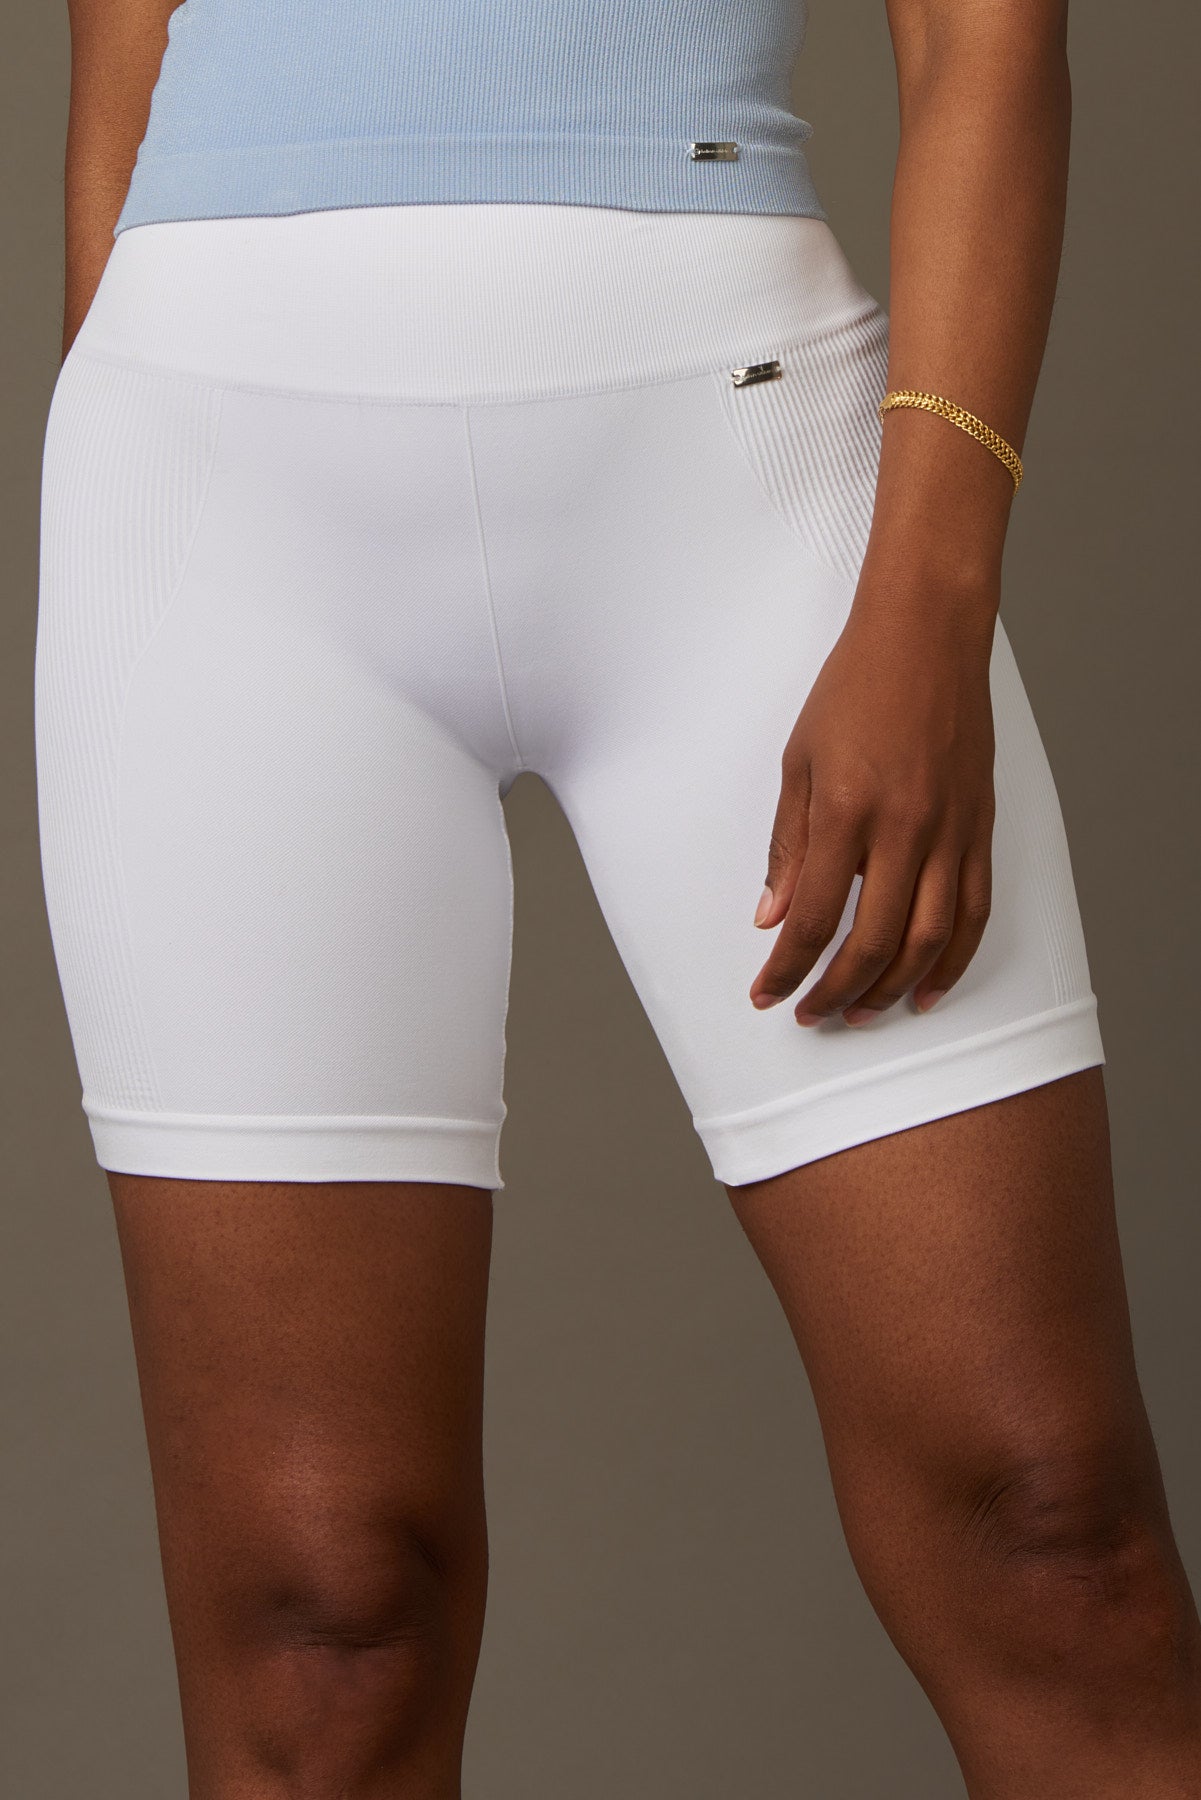 Bliss Biker Push-Up in White-Bikers-Tienda Ropa Leggings Yoga Sostenibles Reciclados Mujer On-line Barcelona Believe Athletics Sustainable Recycled Yoga Clothes